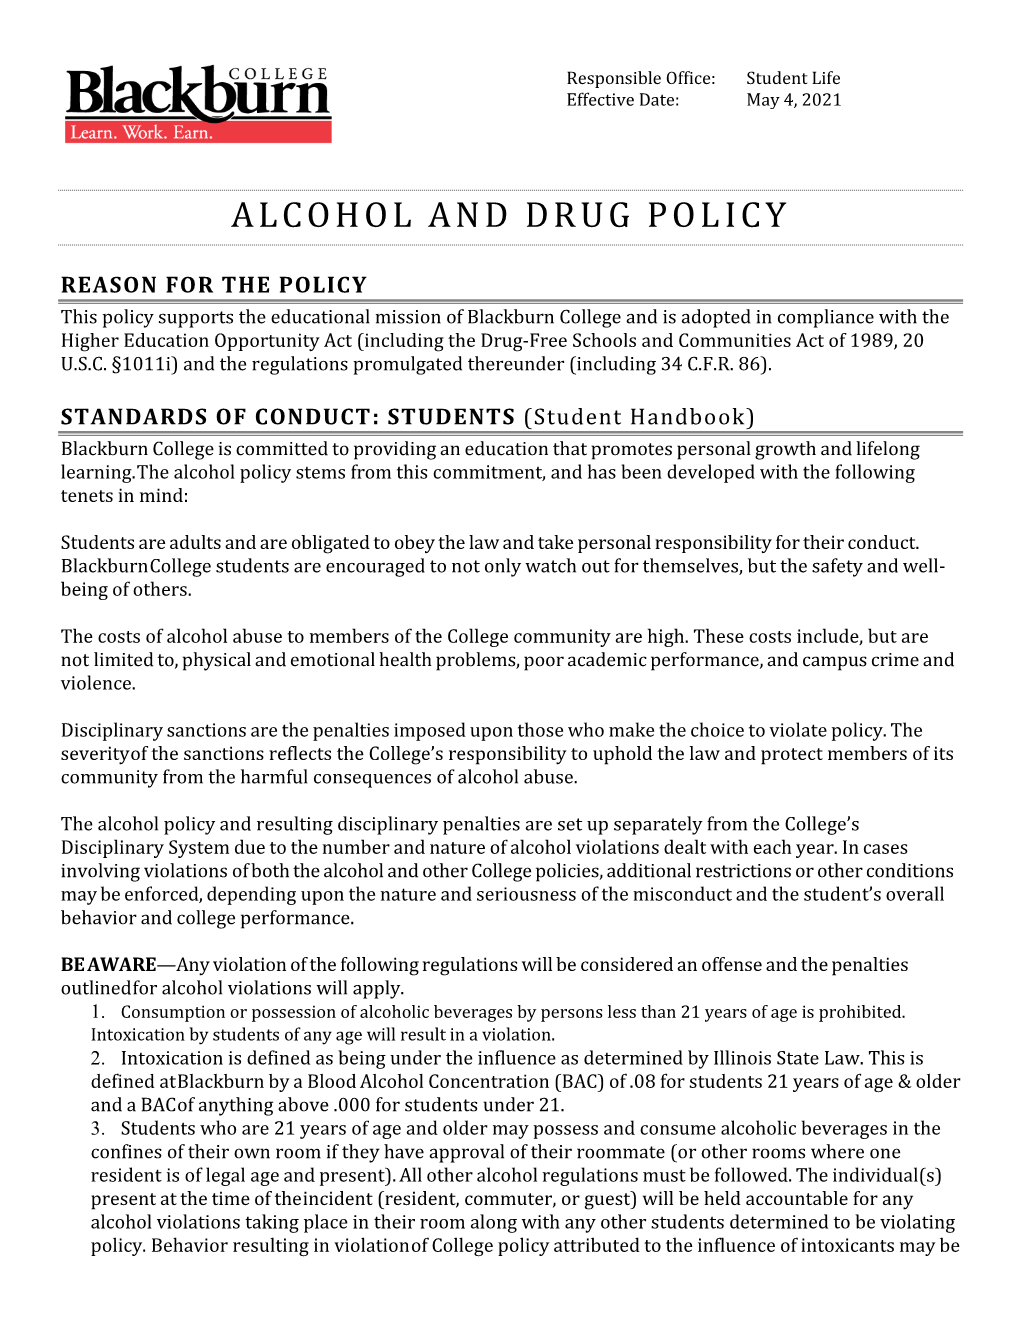 Alcohol and Drug Policy Page 2